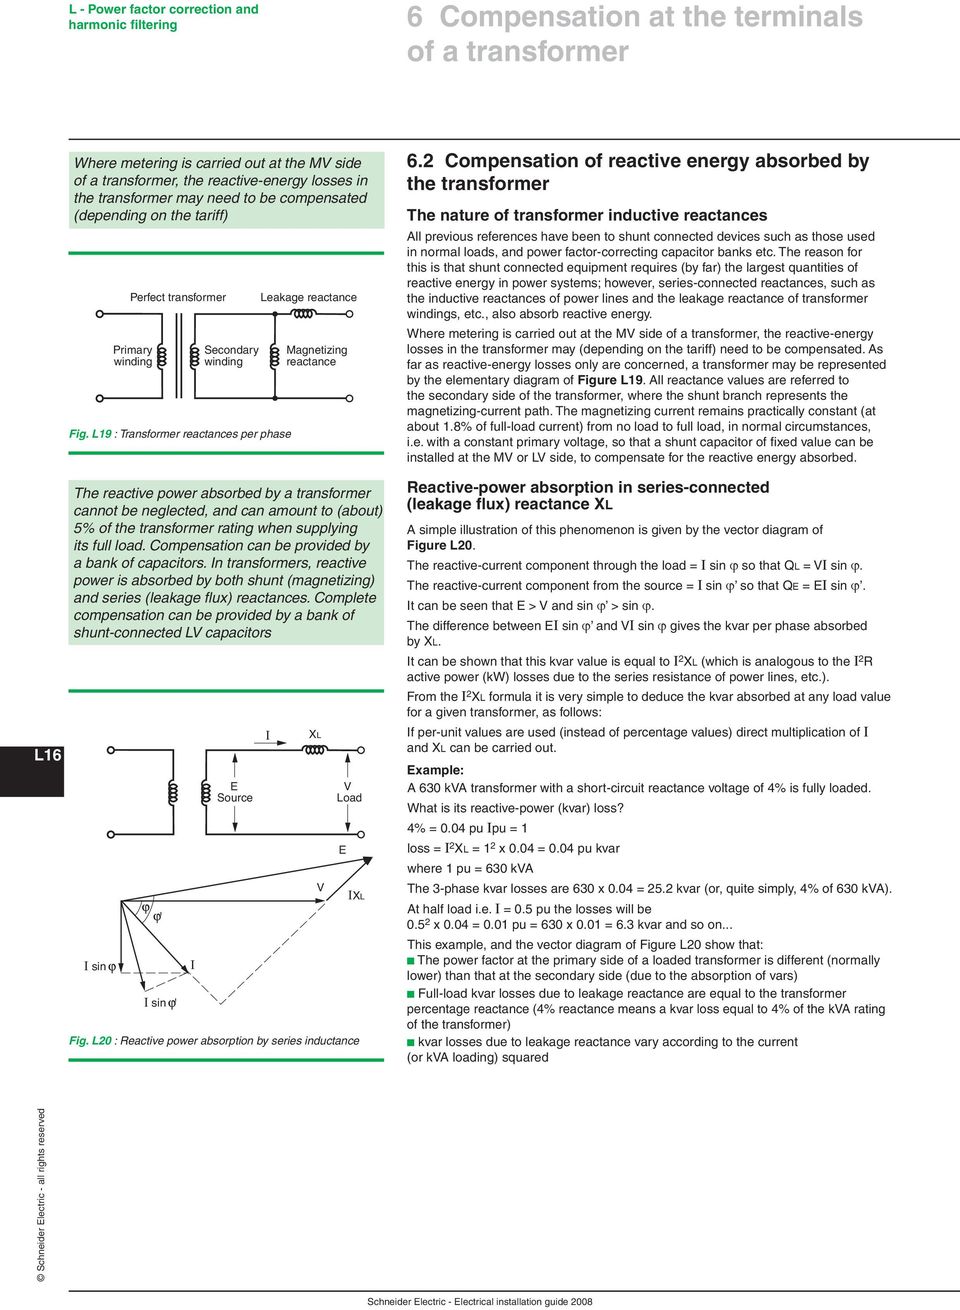 L19 : Transformer reactances per phase Leakage reactance Magnetizing reactance The reactive power absorbed by a transformer cannot be neglected, and can amount to (about) 5% of the transformer rating